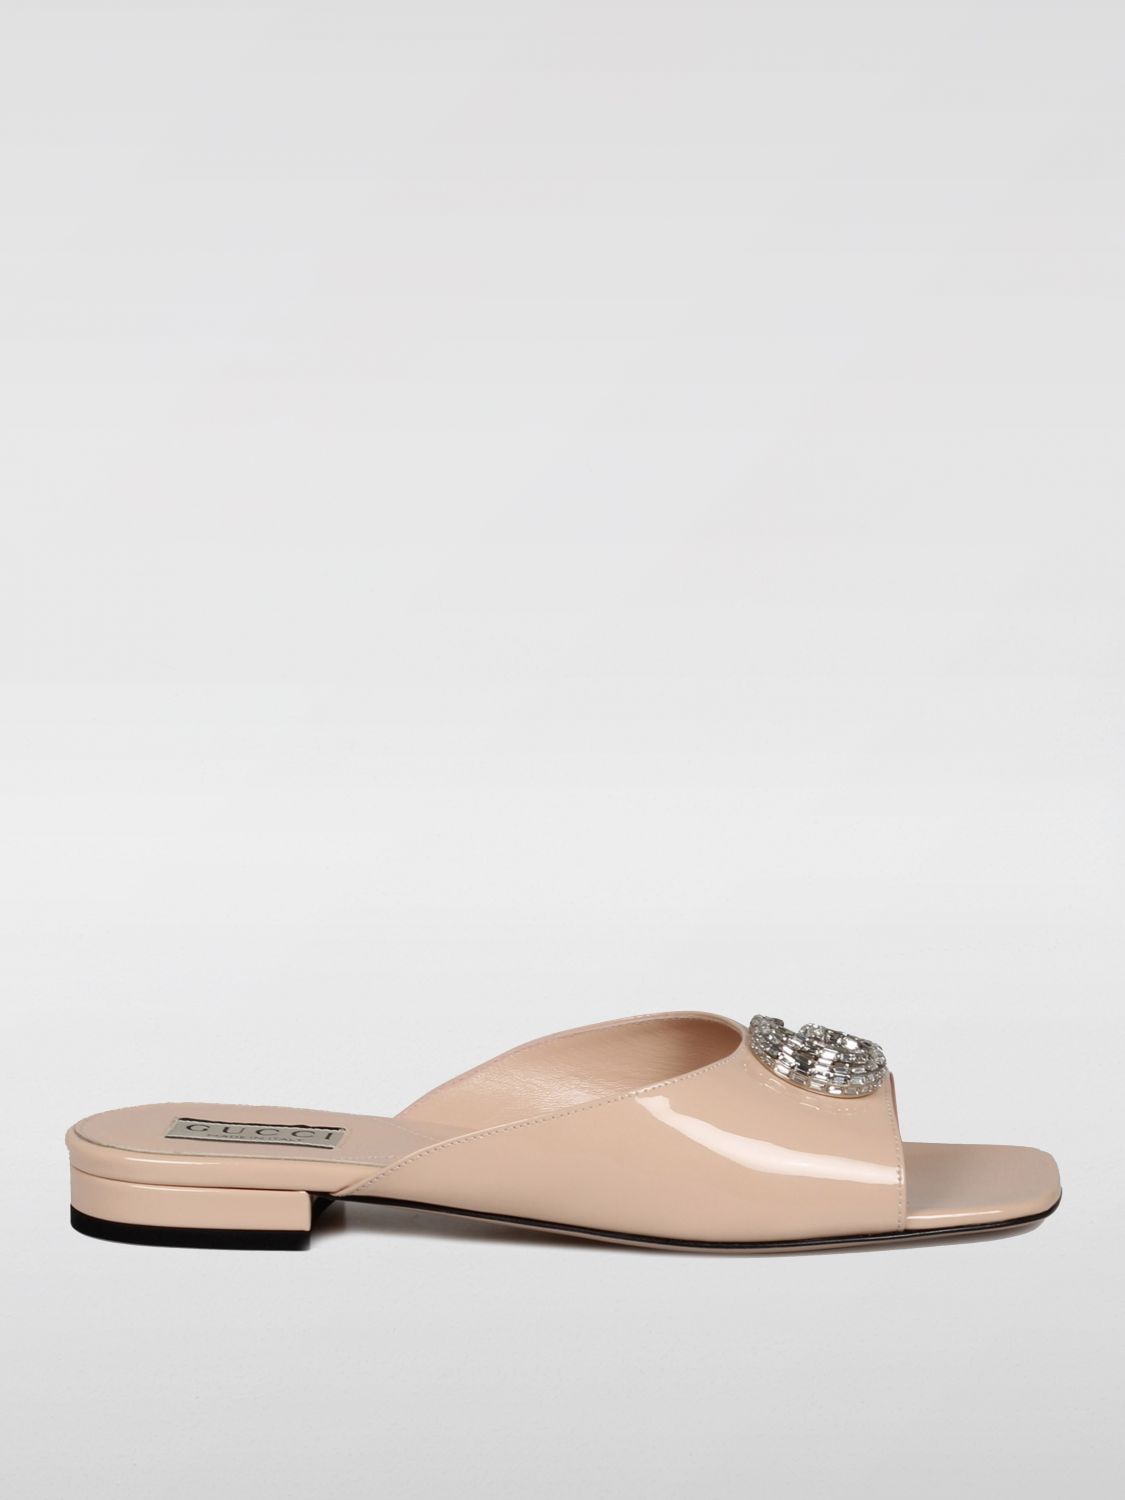 Gucci Shoes GUCCI Woman color Nude